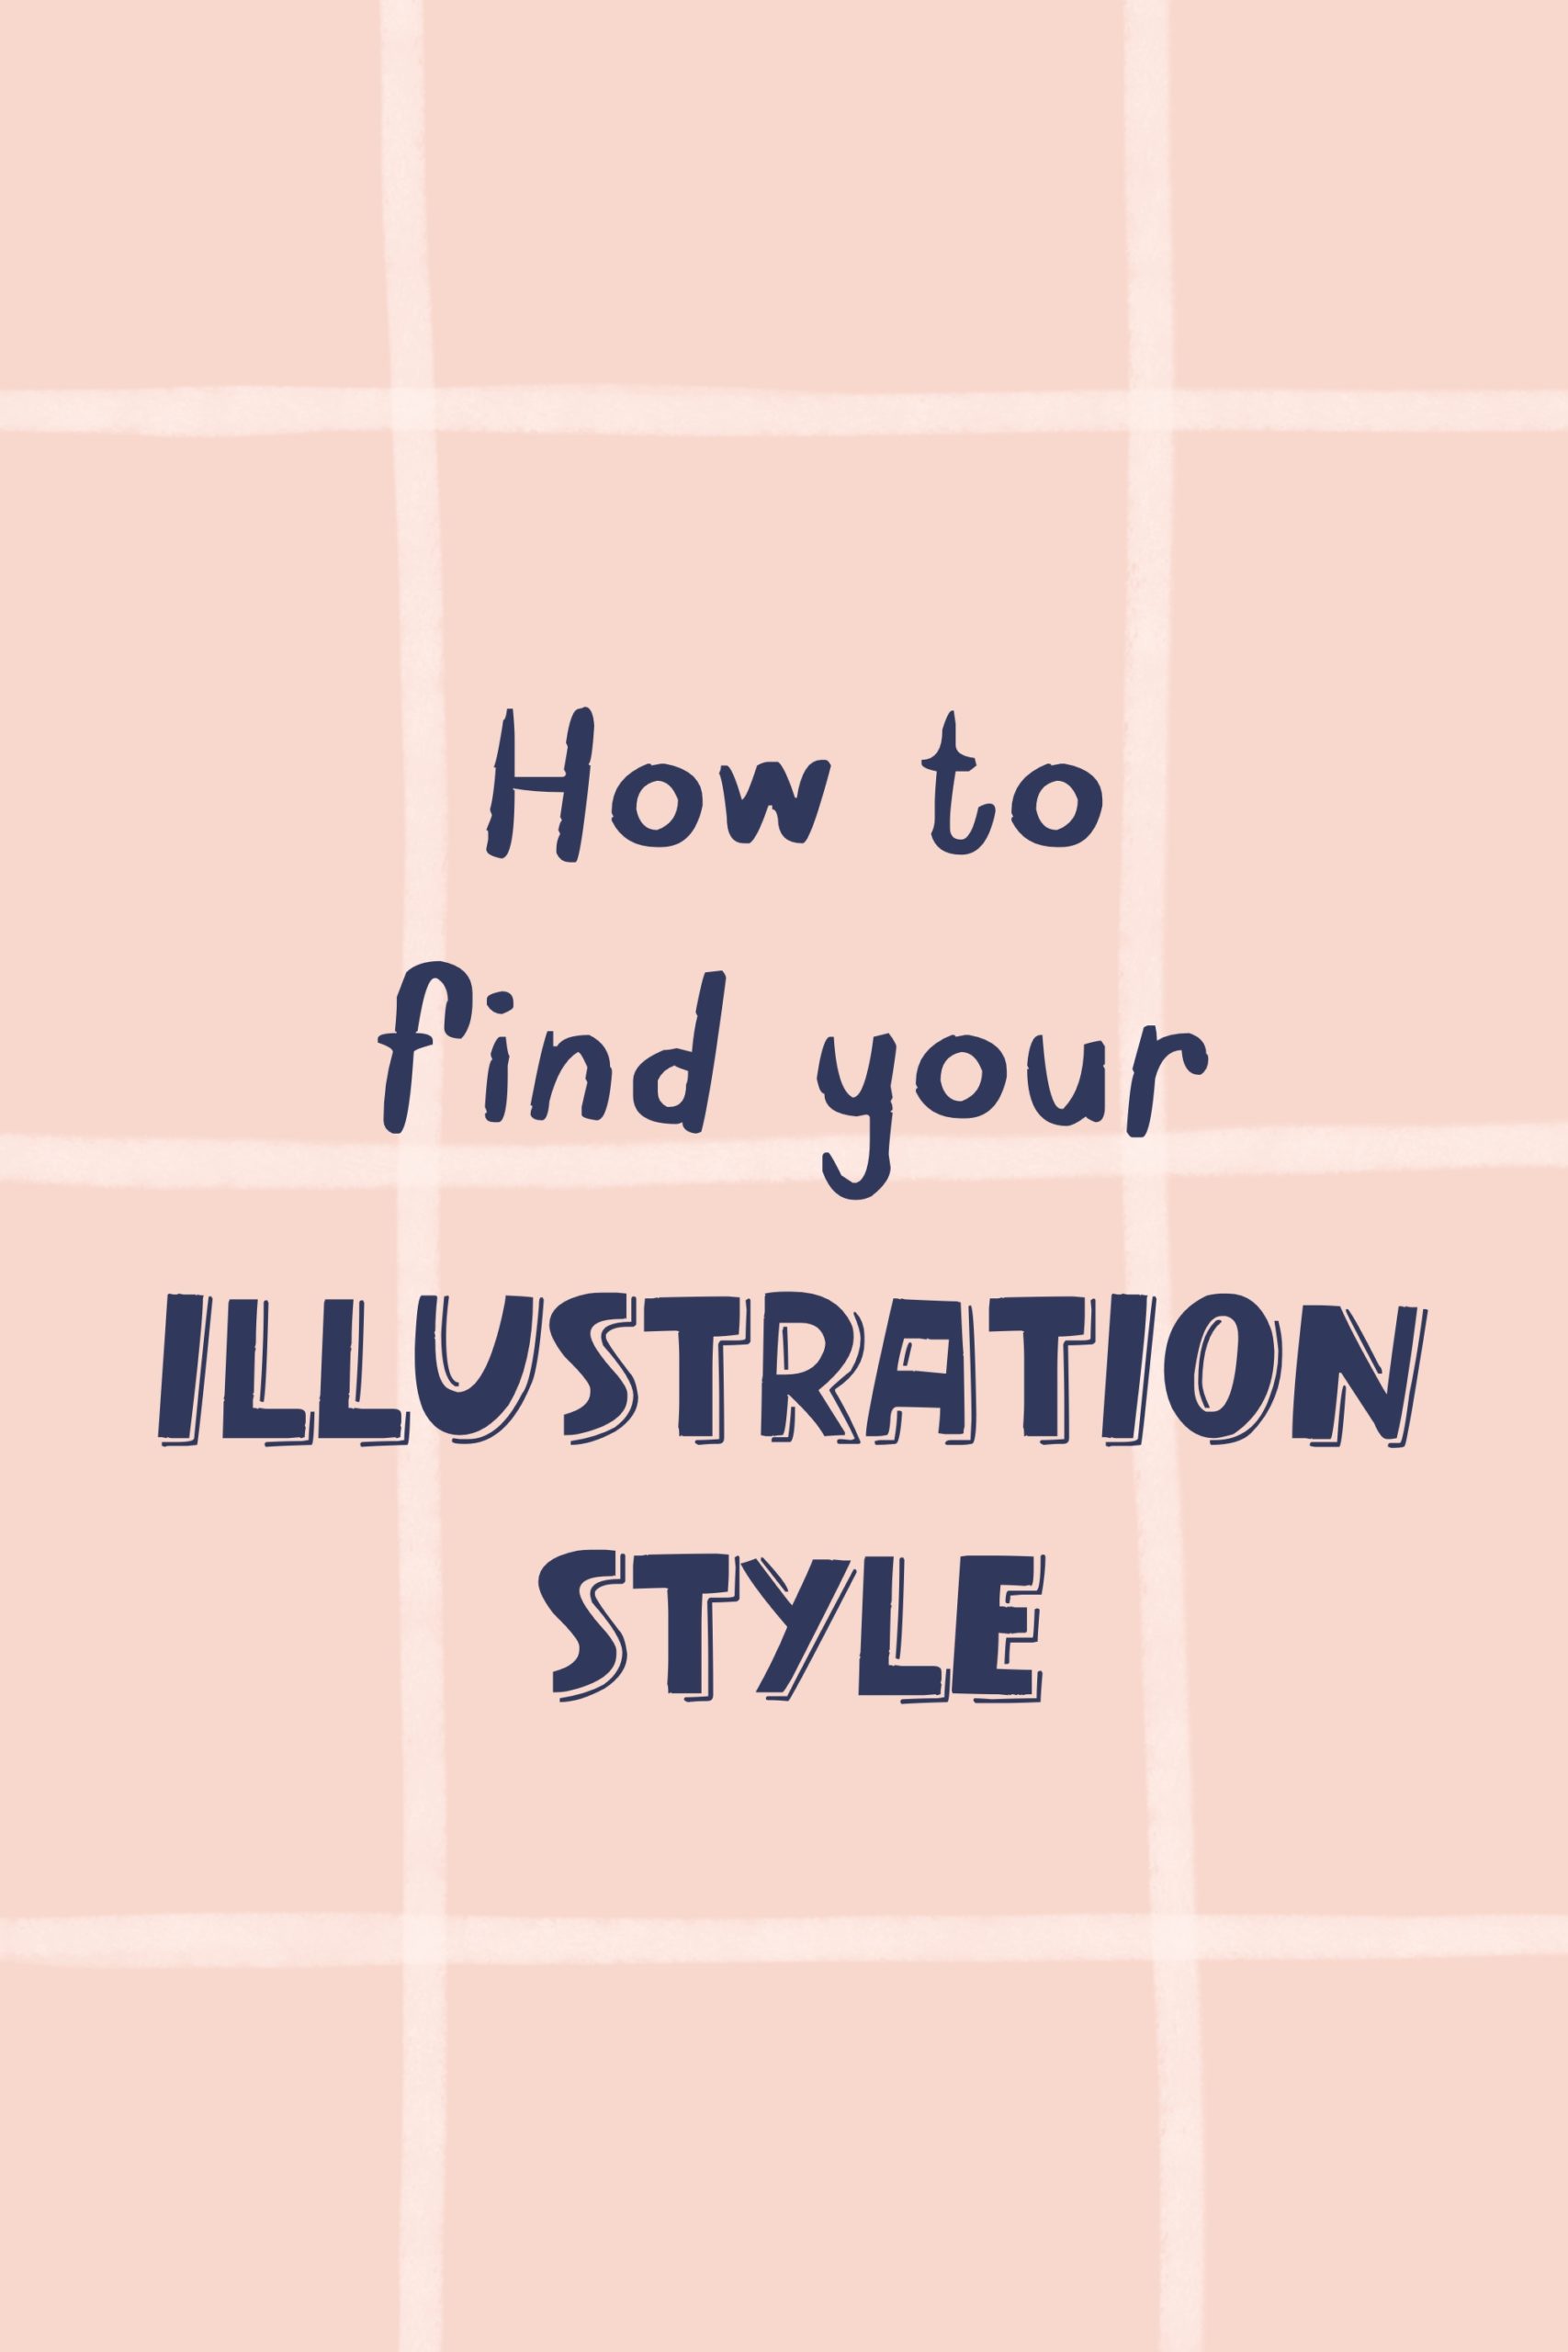 How to find your illustration style